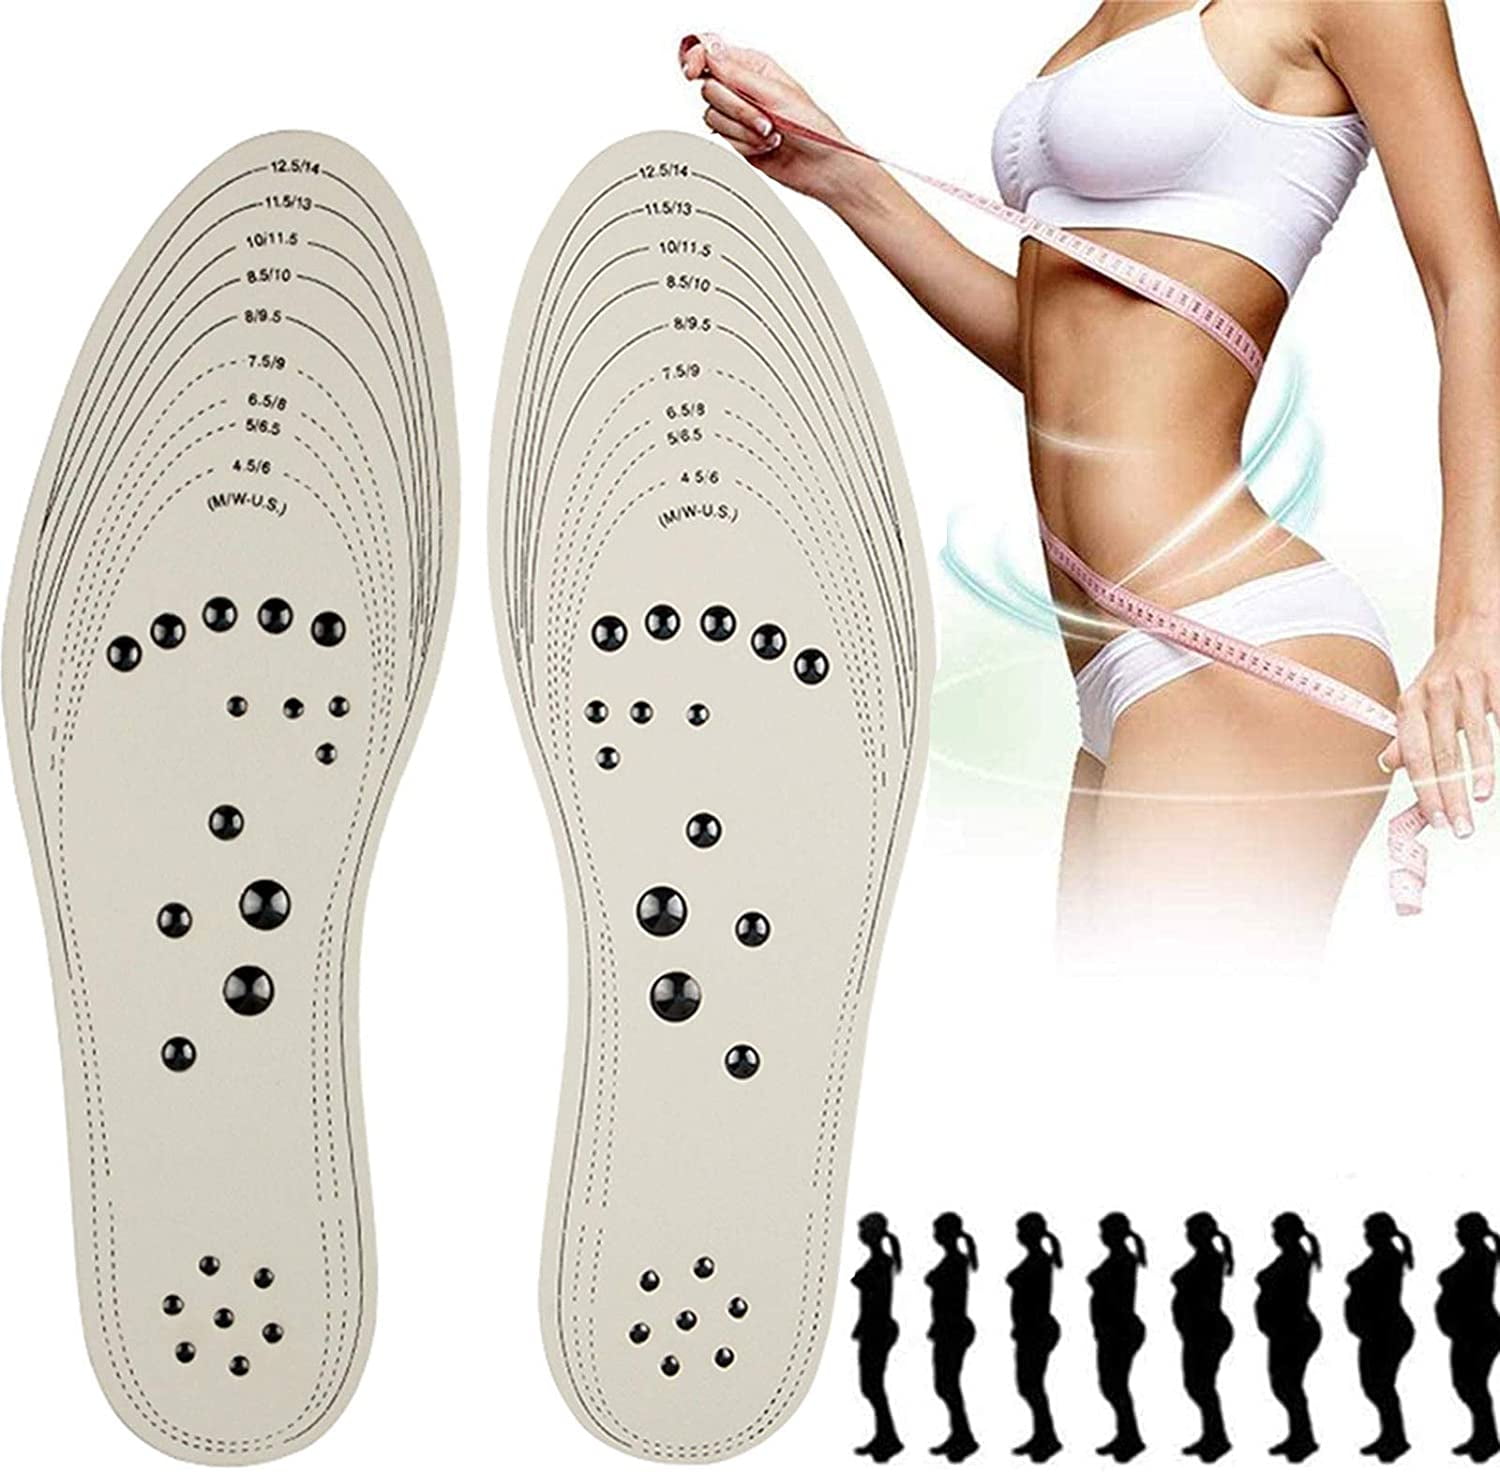 Acupressure Magnetic Massage Weight Loss Therapy Slimming Insoles S Ou 